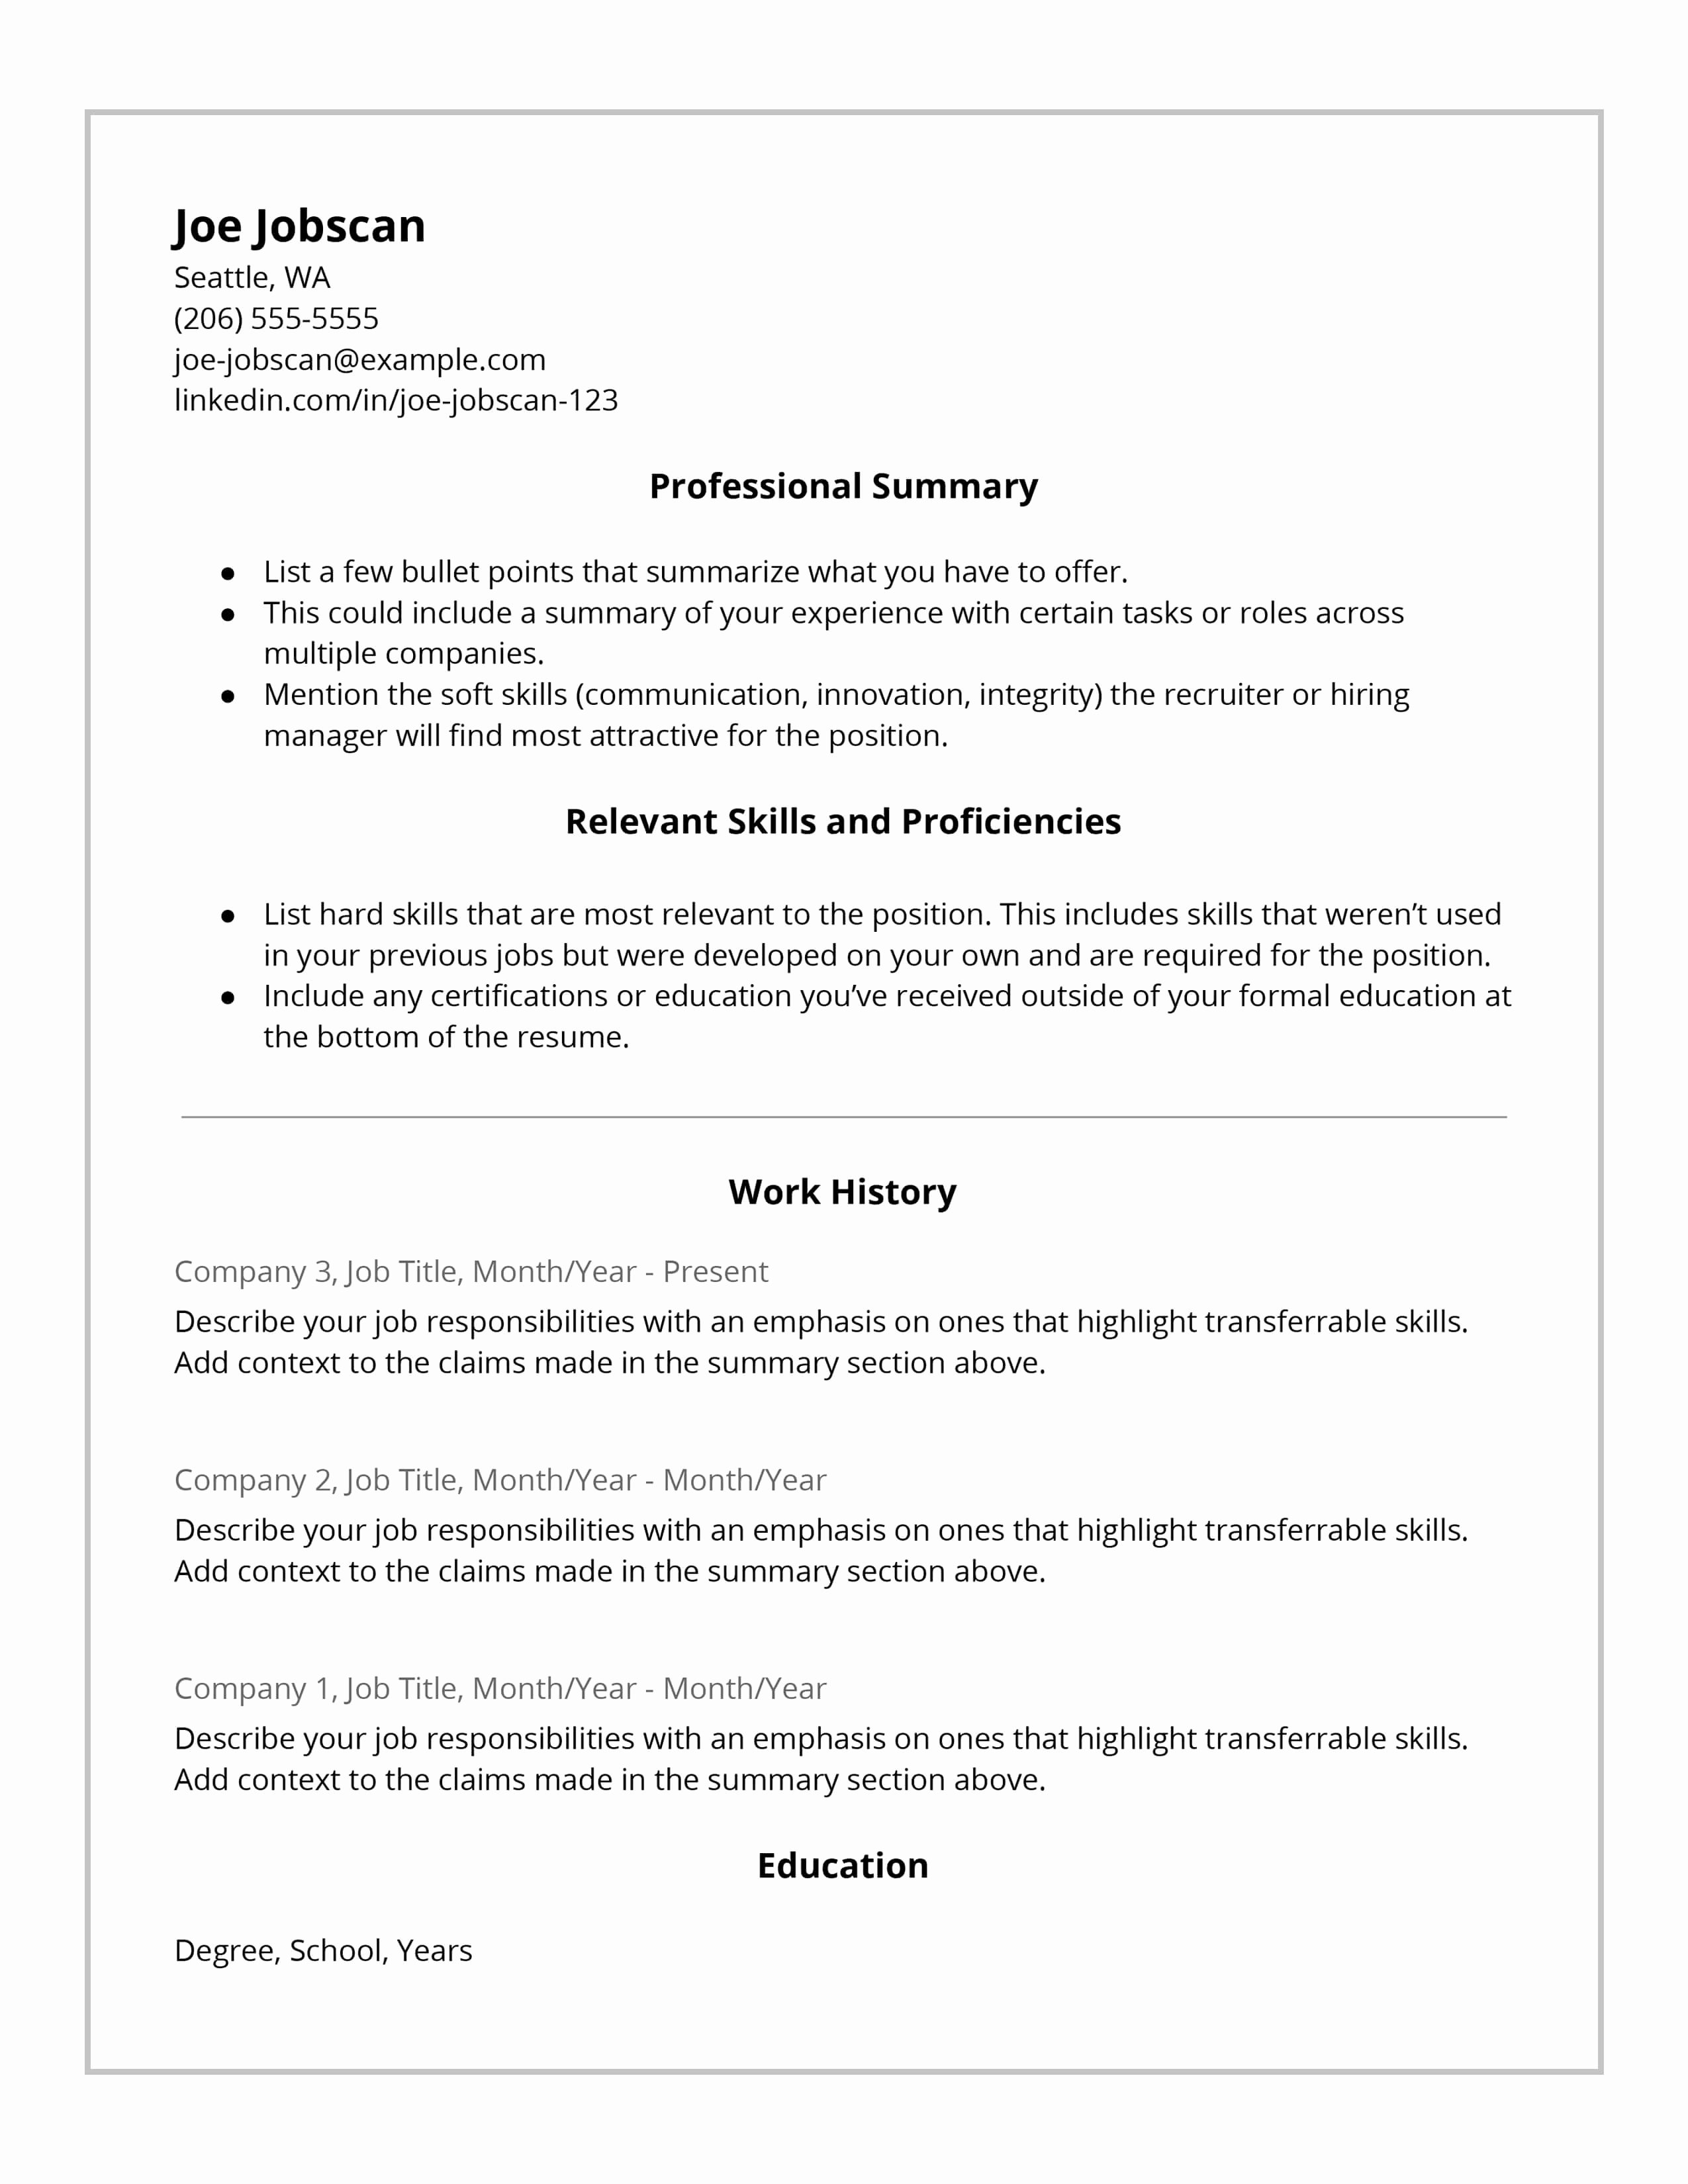 Free Functional Resume Template Beautiful why Recruiters Hate the Functional Resume format Jobscan